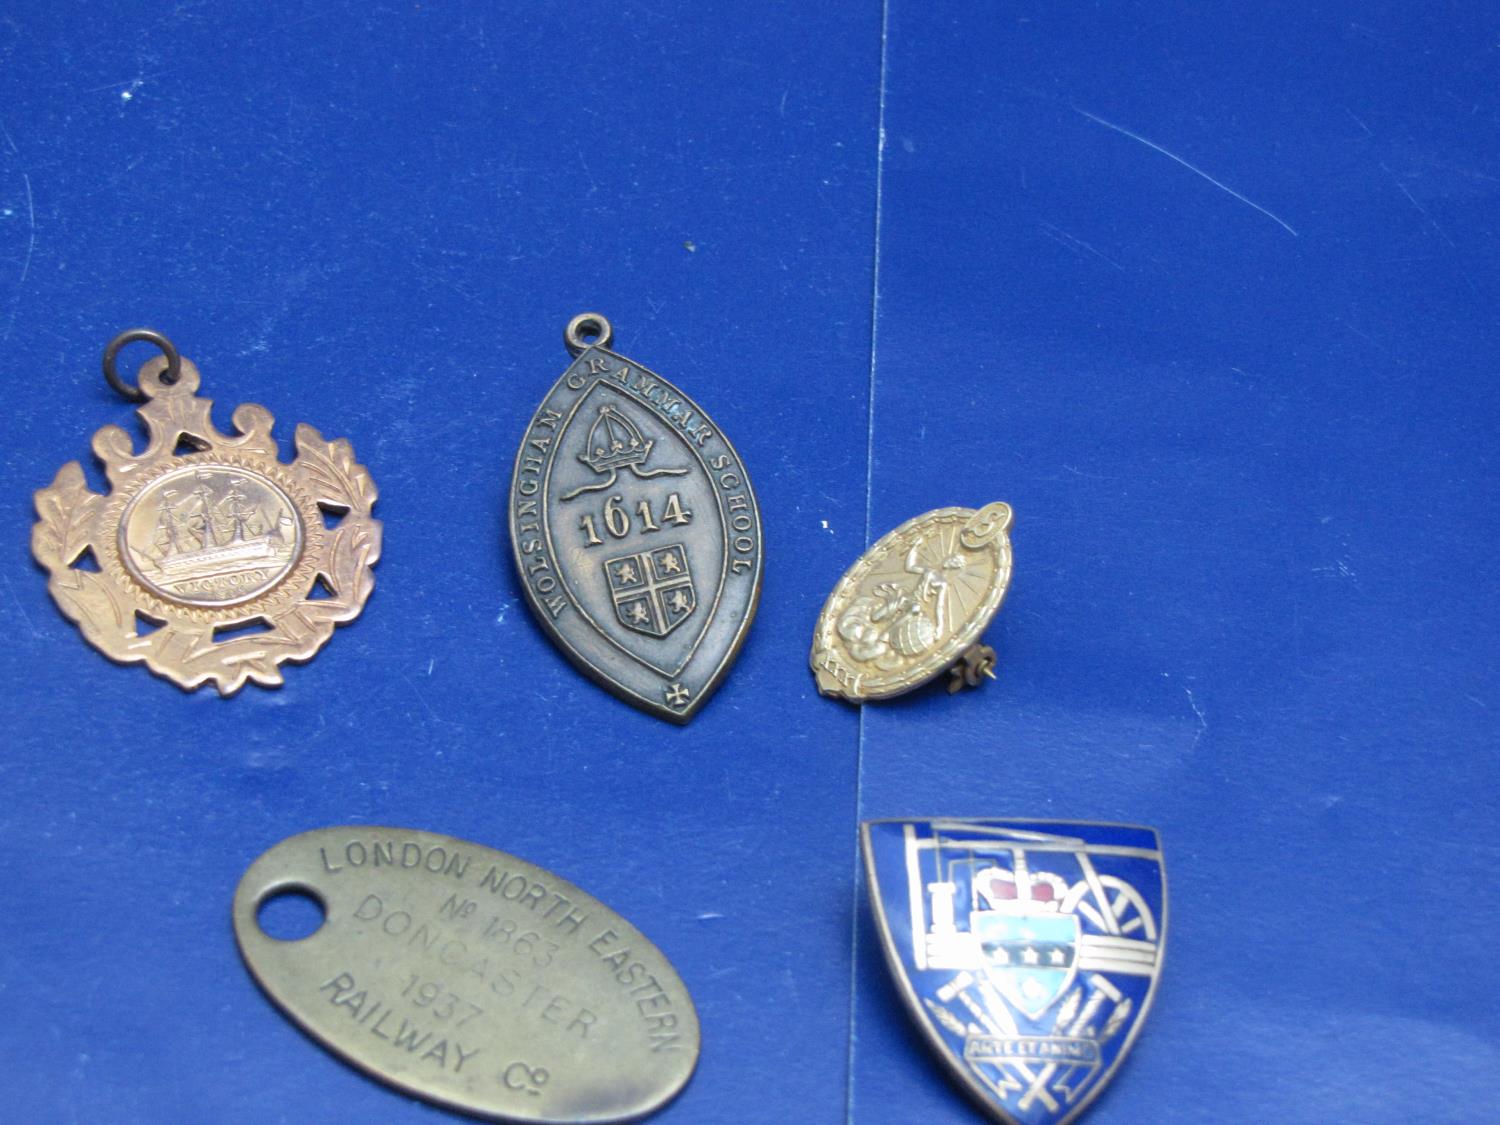 A job lot of collectable badges including silver etc